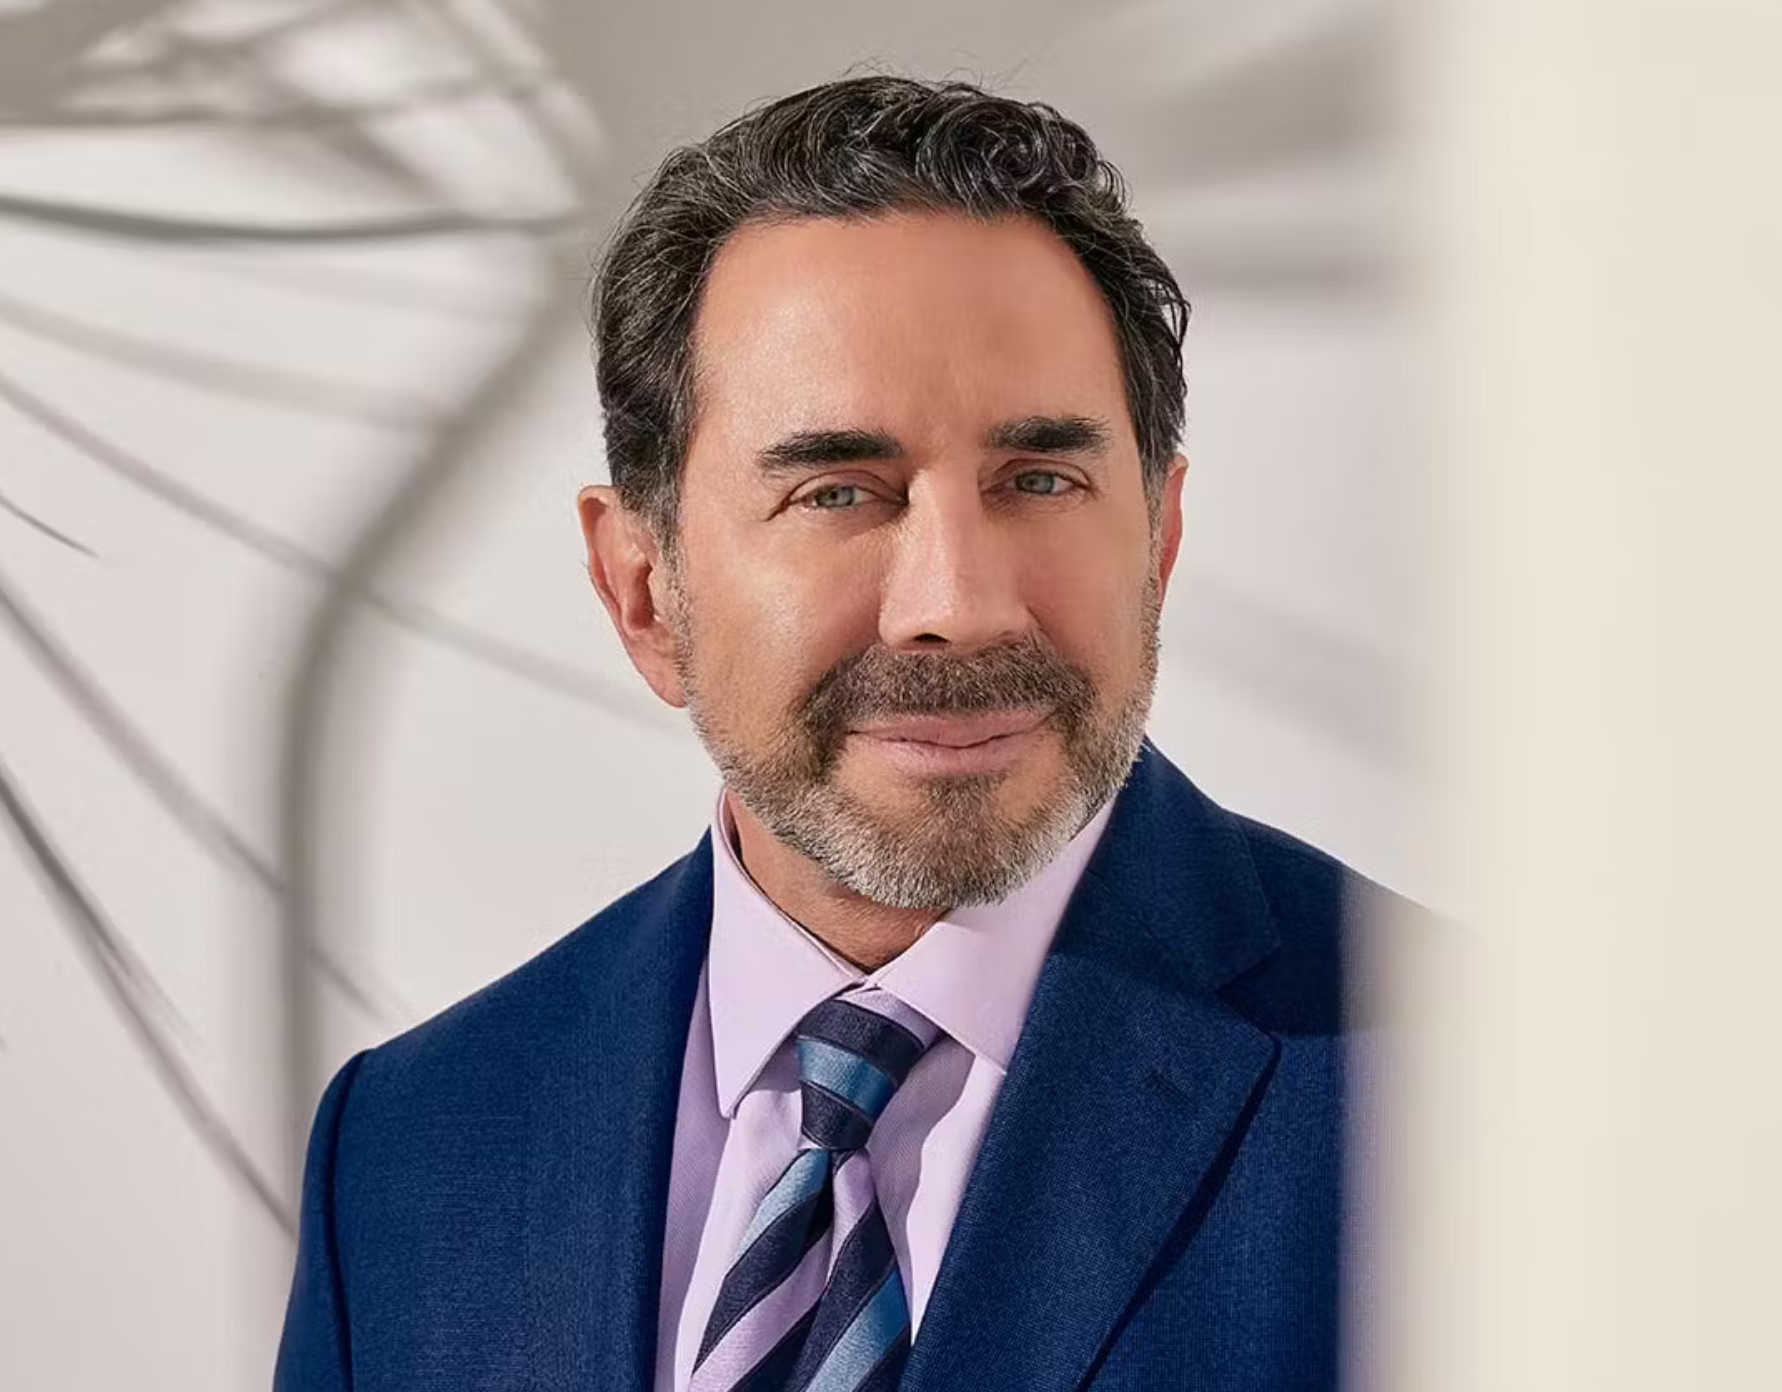 Dr. Paul Nassif, Facial Plastic Surgeon and Star of Botched on E! TV, to Deliver Keynote  Address at NWC and GCC Spring Commencement Ceremony